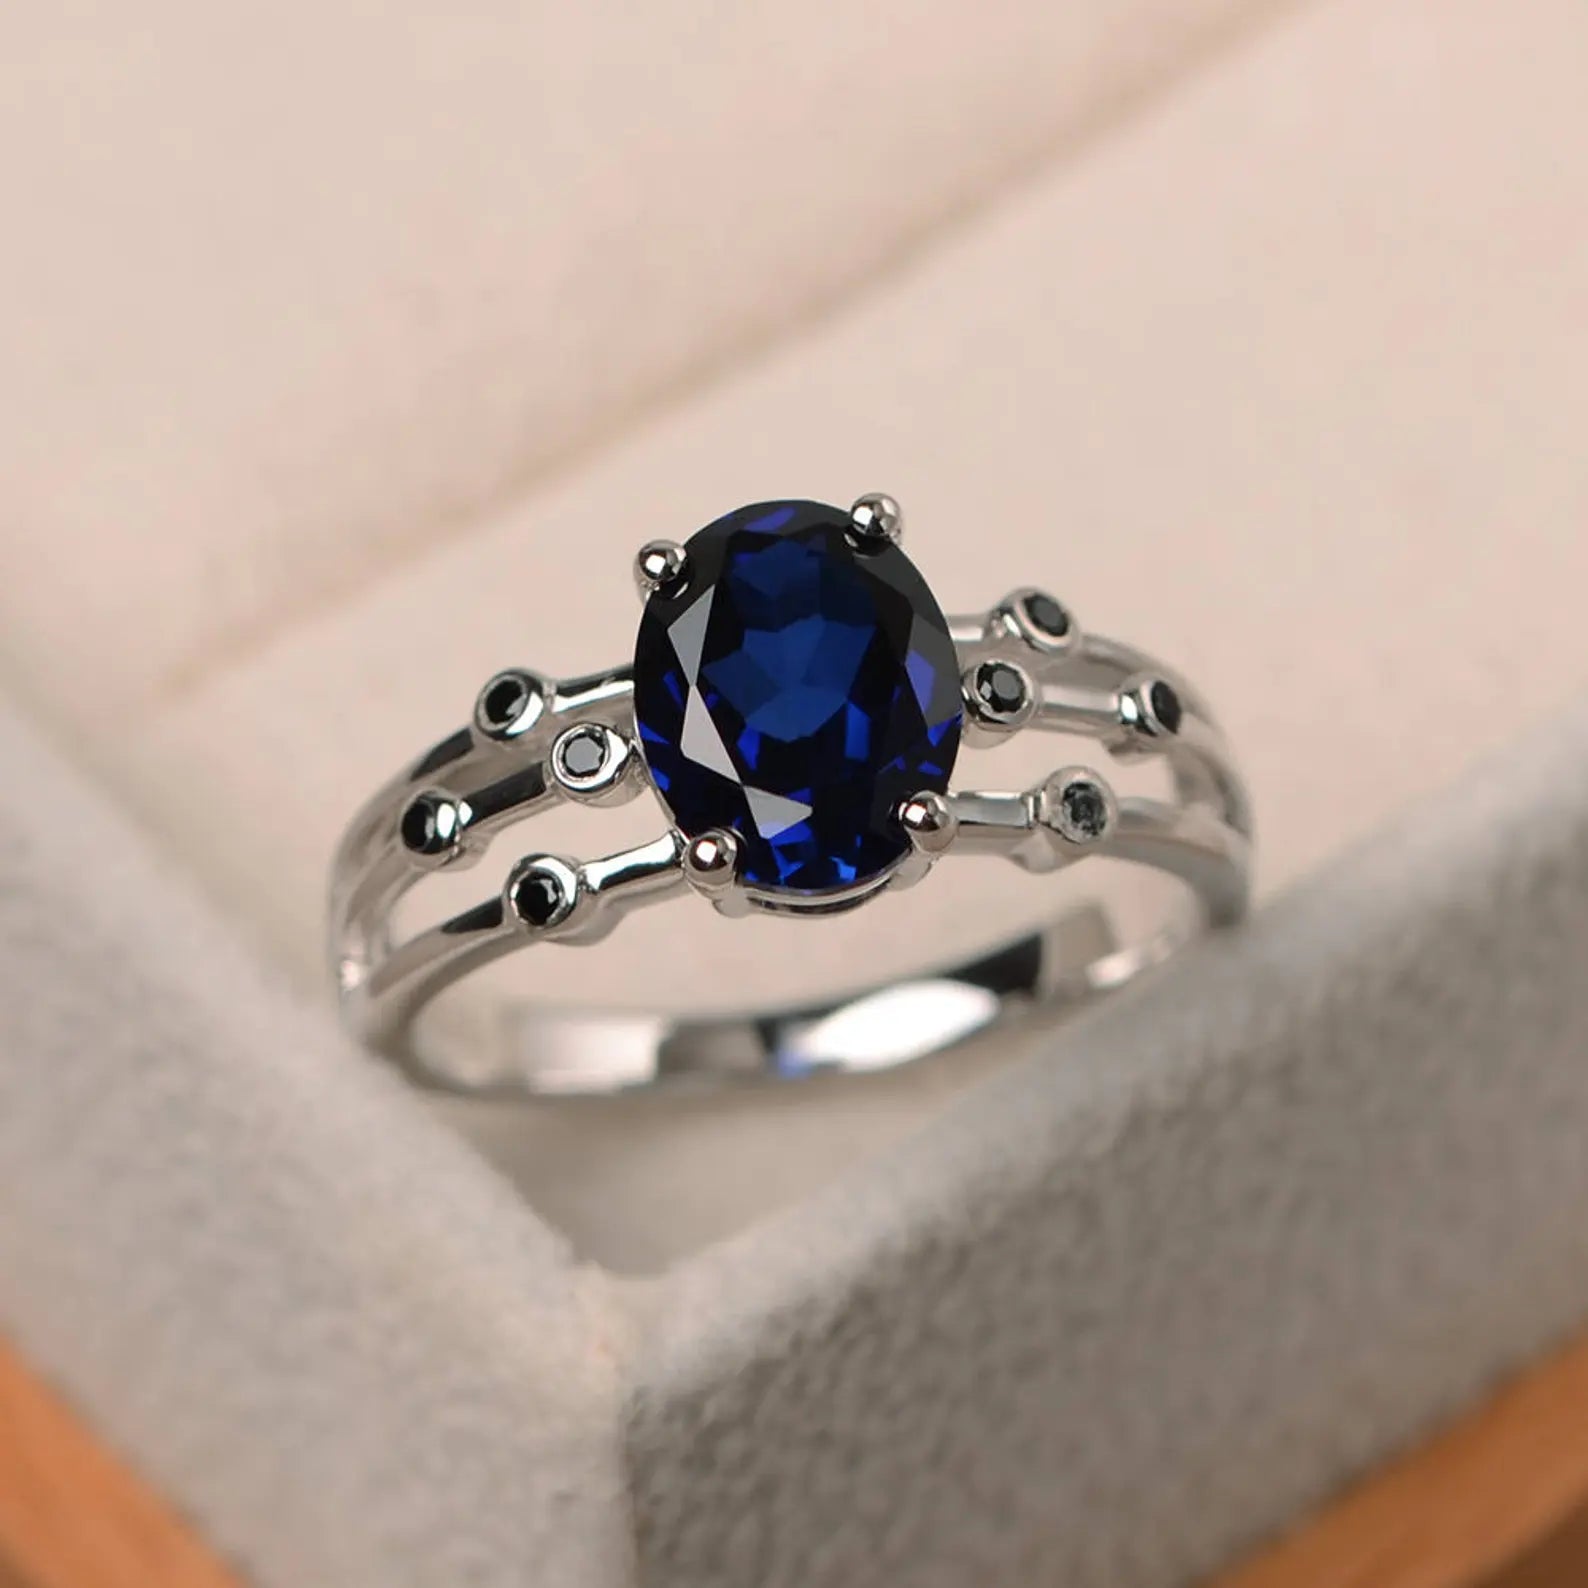 Oval Cut Blue Sapphire Stone Ring